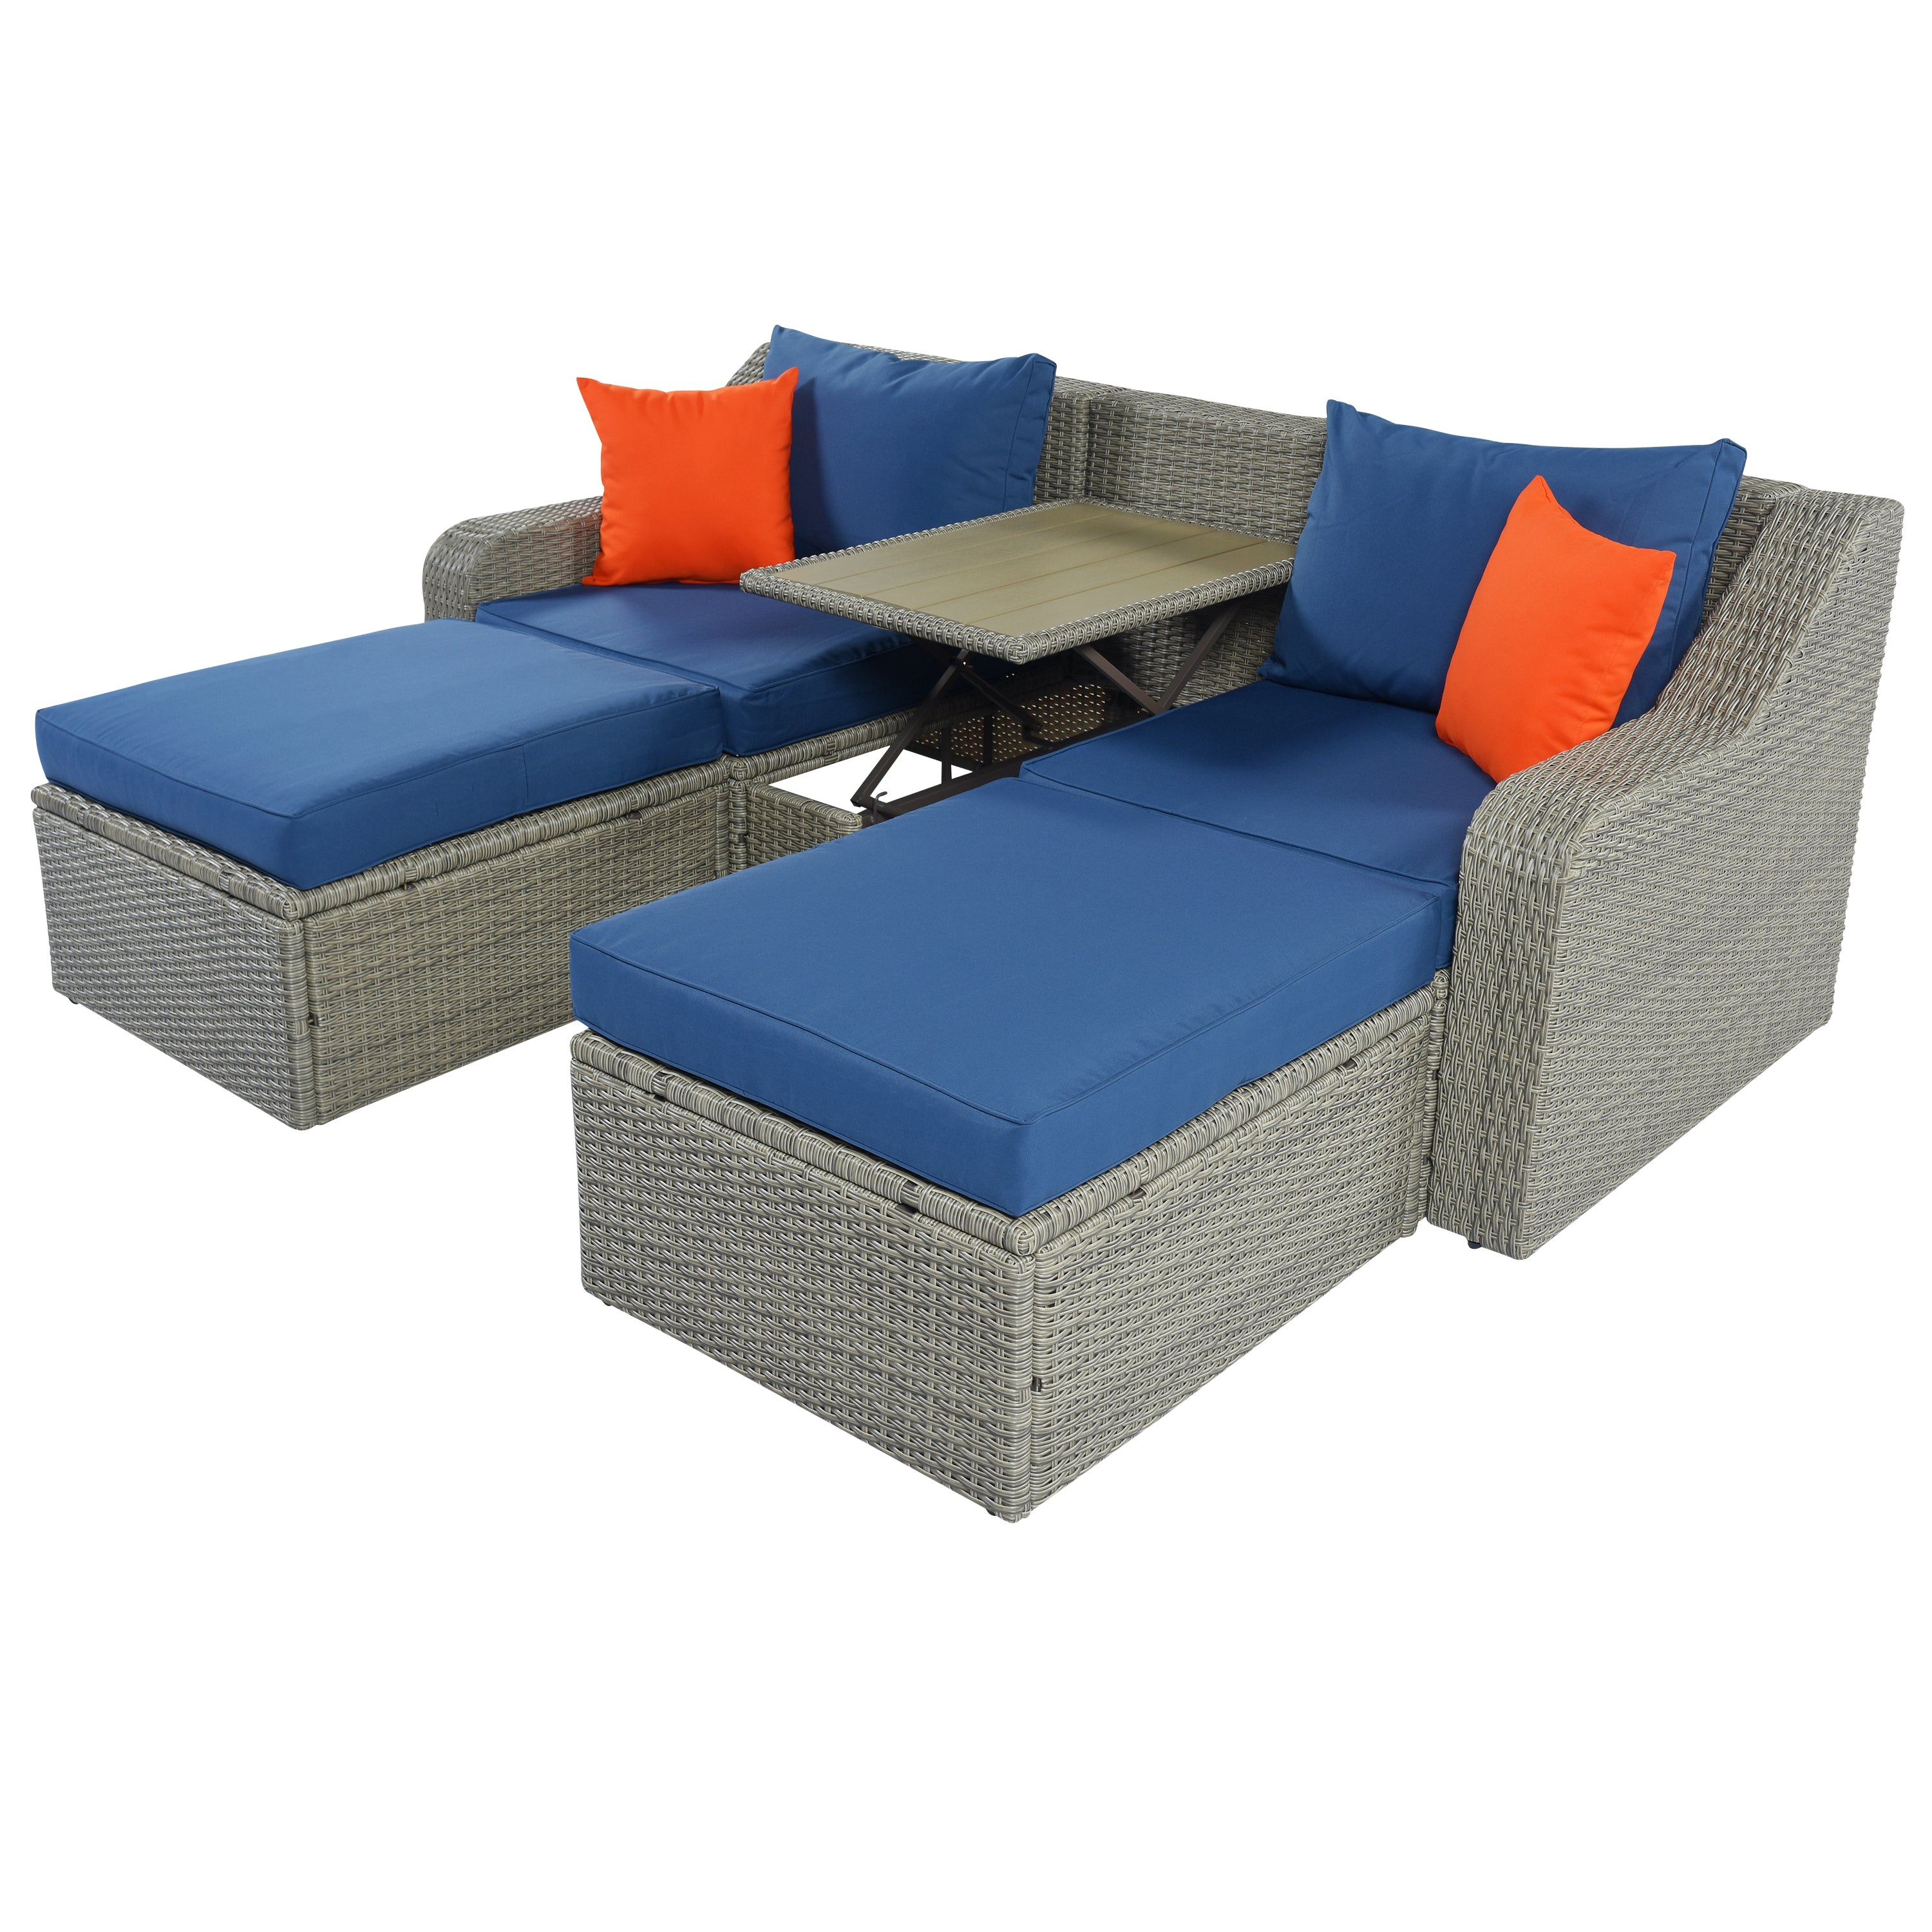 3-Piece Patio Wicker Sofa with Cushions, Pillows, Ottomans and Lift Top Coffee Table